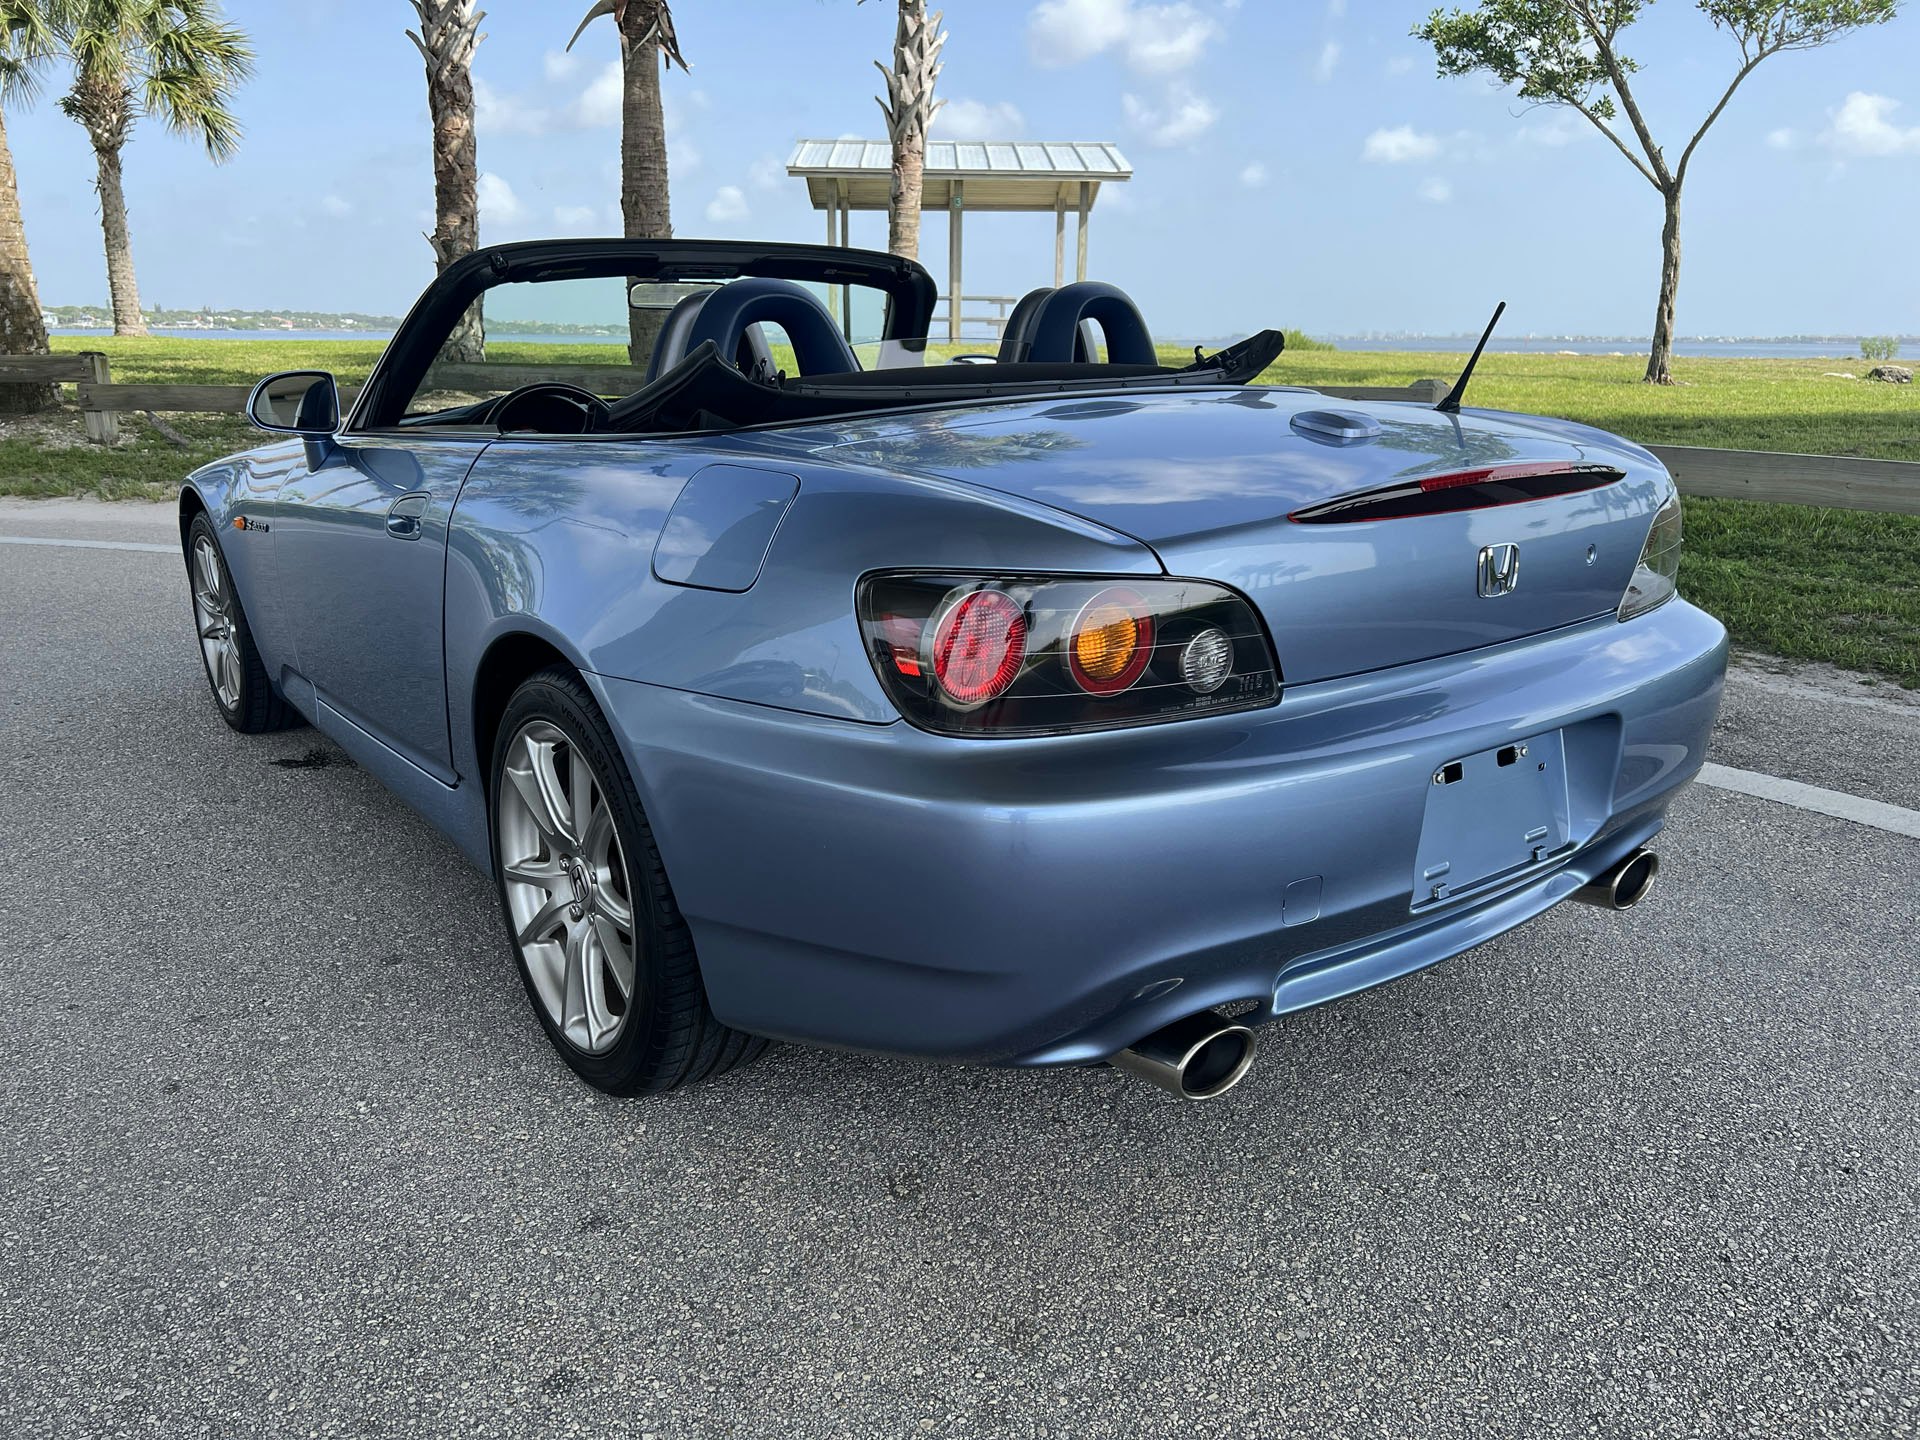 2000–03 Honda S2000 values have surpassed contemporary Boxsters and Z3s -  Hagerty Media